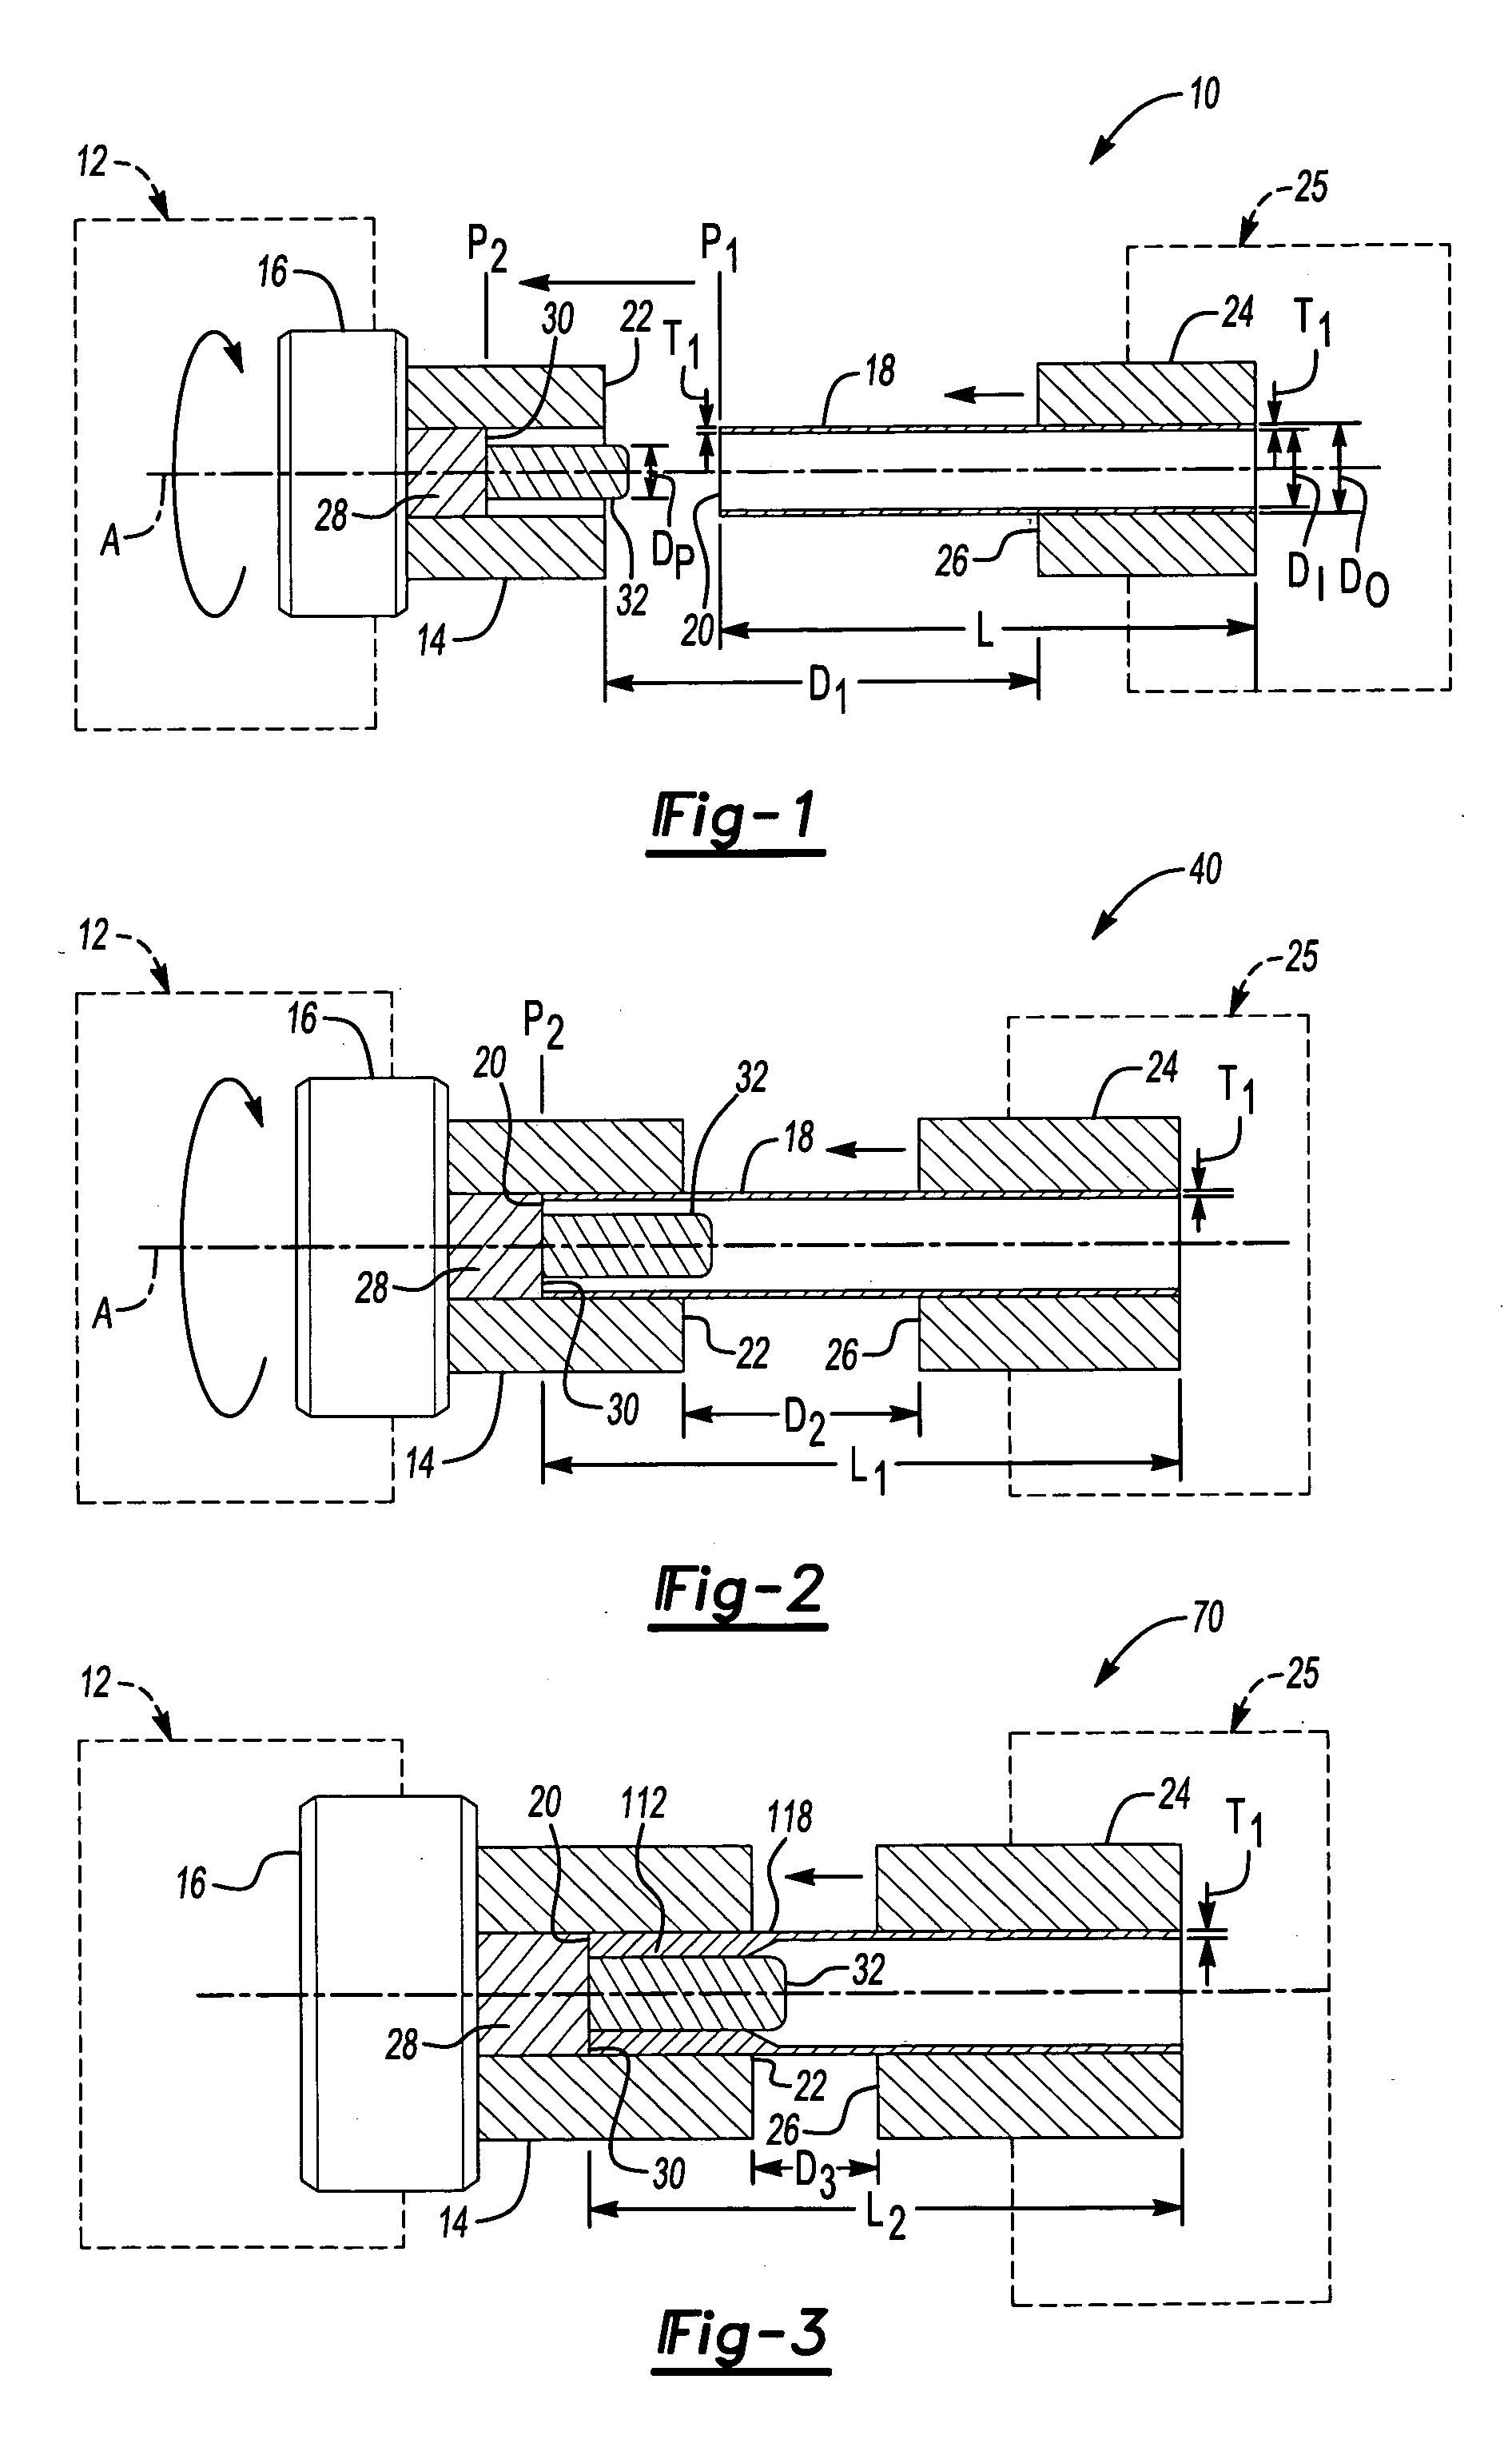 One-piece flexible tube connector and method of making the same